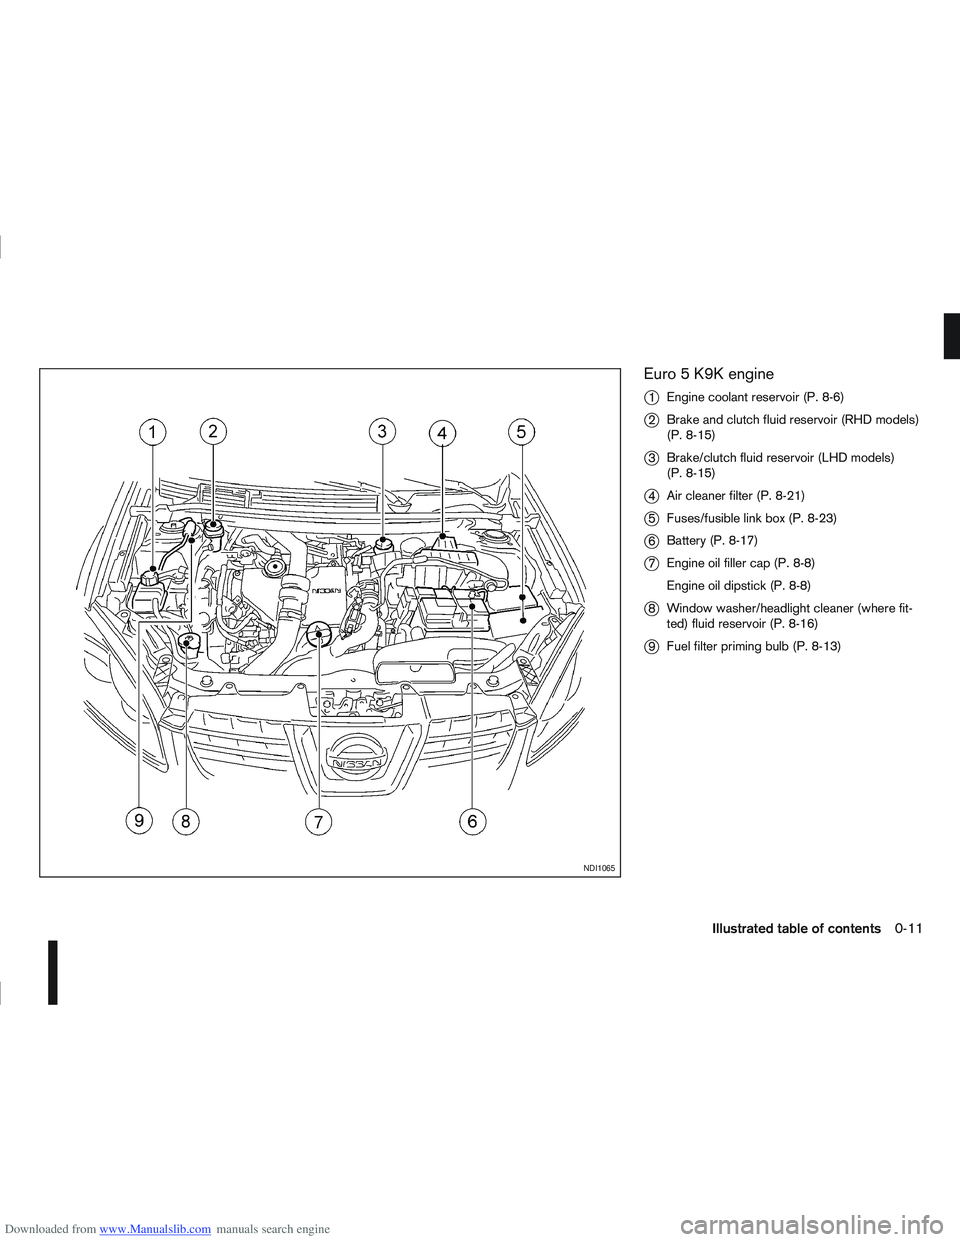 NISSAN QASHQAI 2009  Owners Manual Downloaded from www.Manualslib.com manuals search engine Euro 5 K9K engine
j
1Engine coolant reservoir (P. 8-6)
j2Brake and clutch fluid reservoir (RHD models)
(P. 8-15)
j3Brake/clutch fluid reservoir